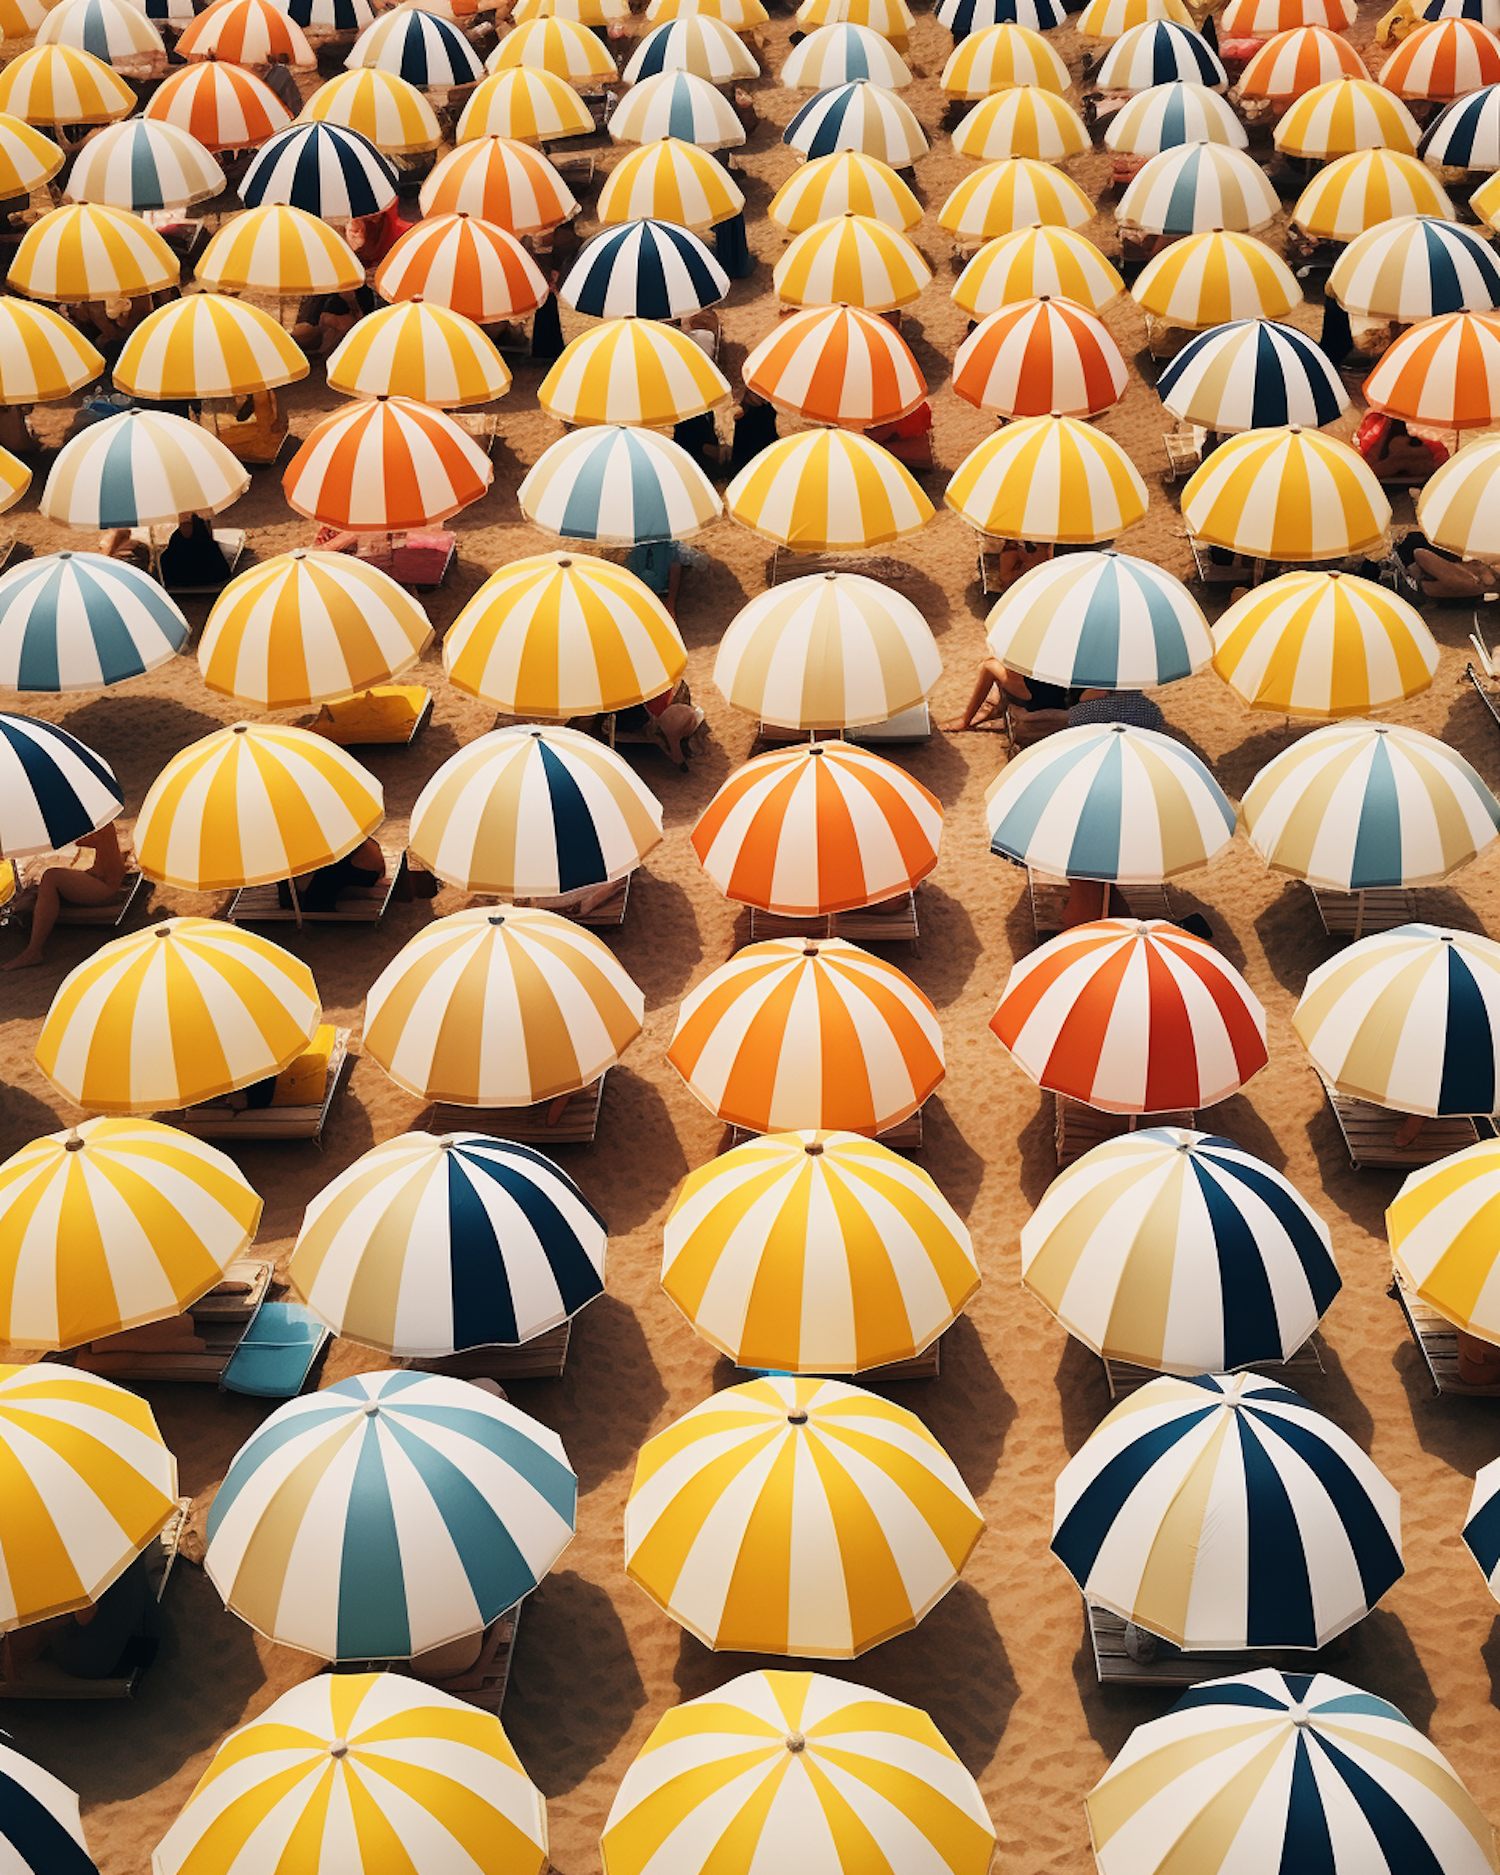 Colorful Symmetry: Beach Umbrellas from Above